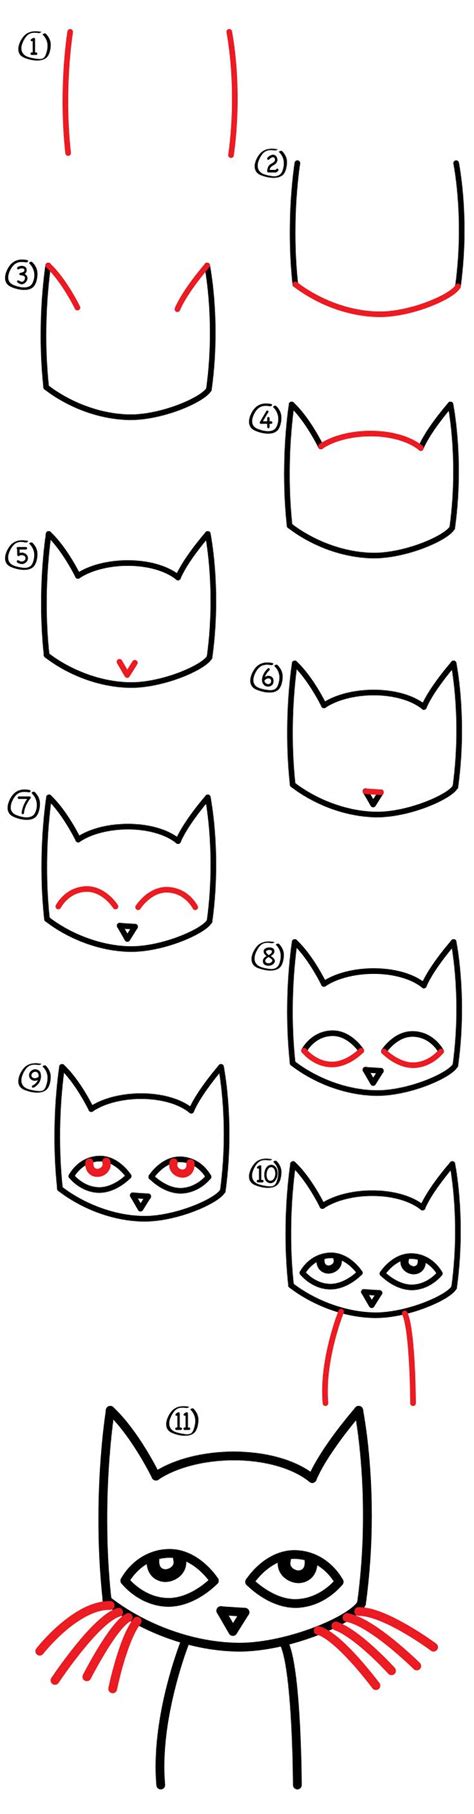 Art Hub For Kids How To Draw A Kitten Tag Us In Your Childrens